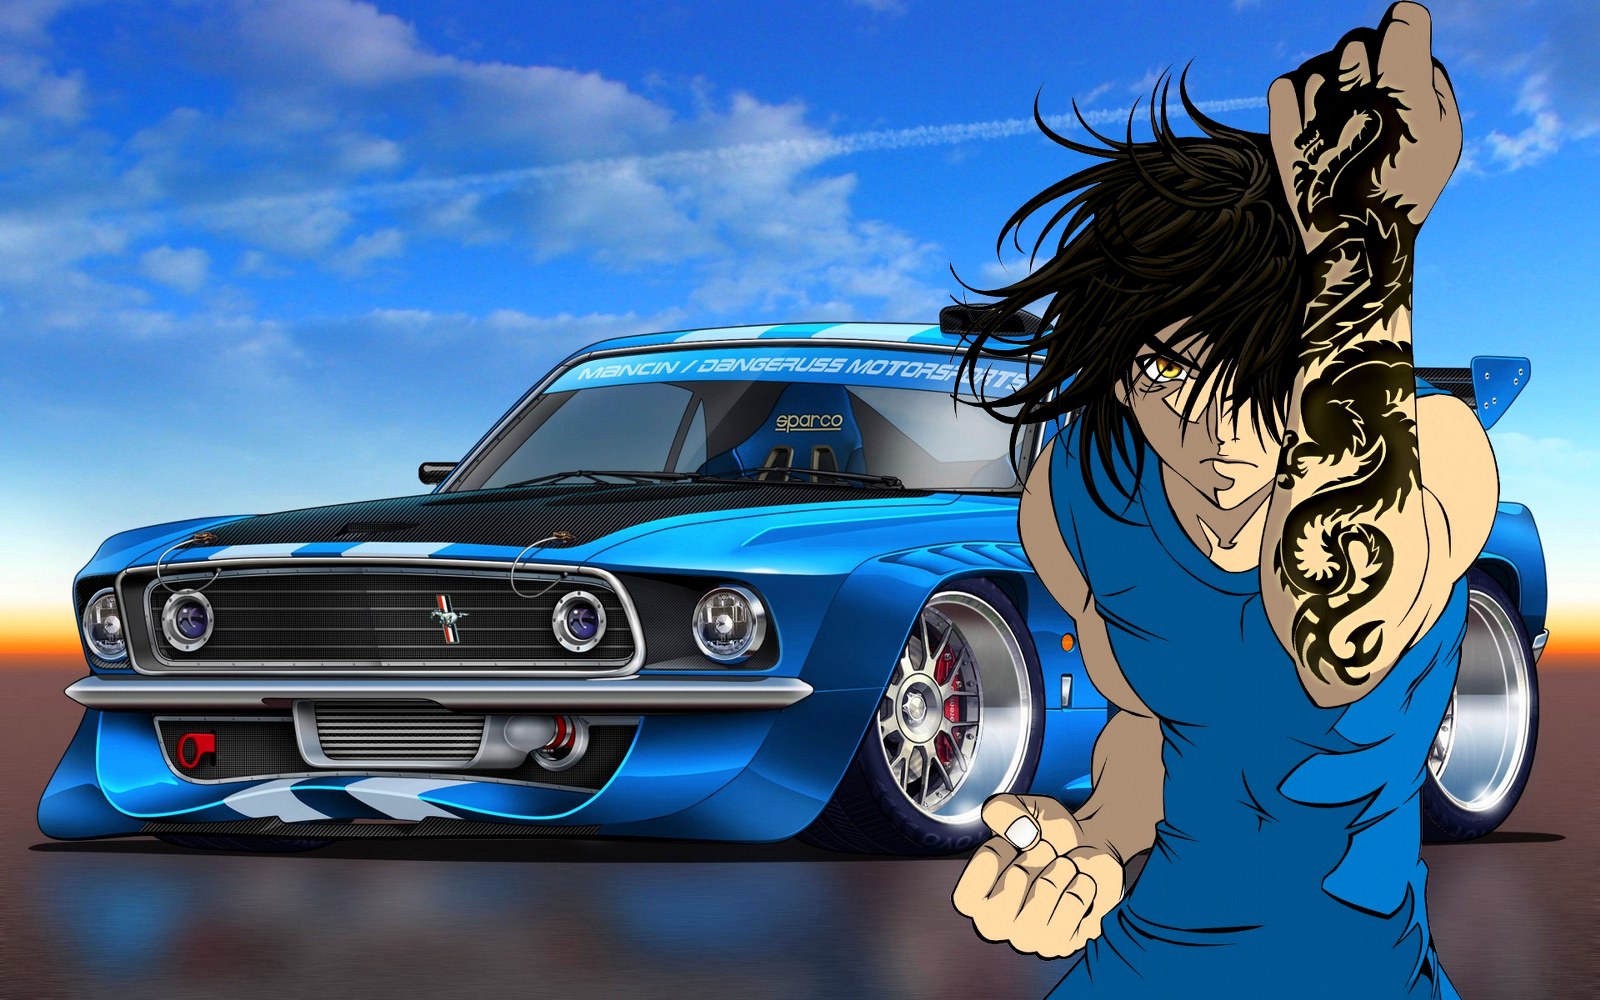 Boy And Racer Car Cartoon wallpapers55.com - Best Wallpapers for